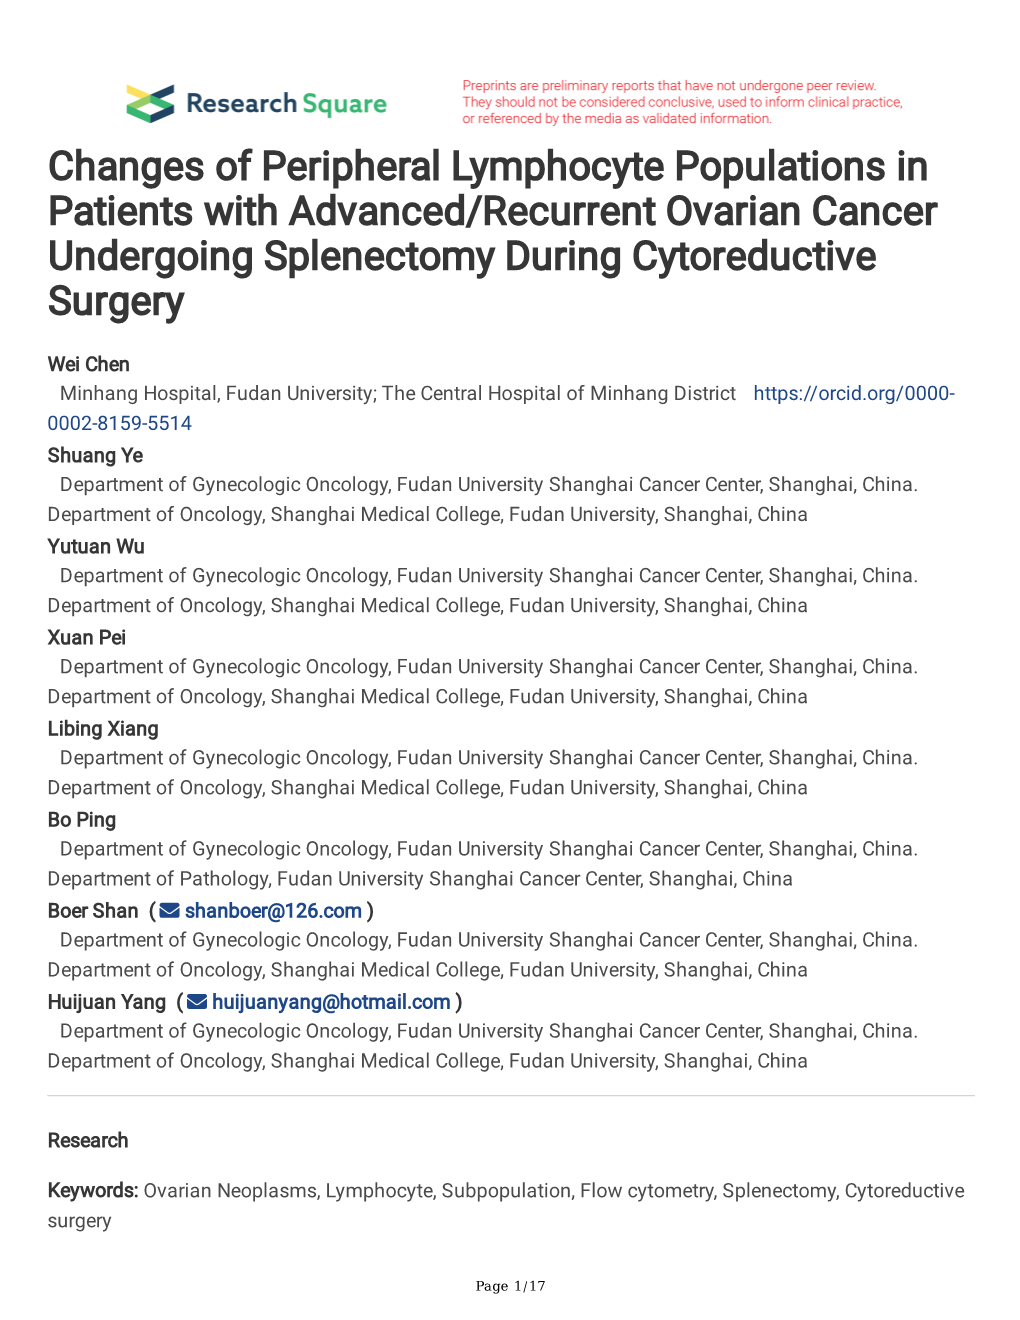 Changes of Peripheral Lymphocyte Populations in Patients with Advanced/Recurrent Ovarian Cancer Undergoing Splenectomy During Cytoreductive Surgery